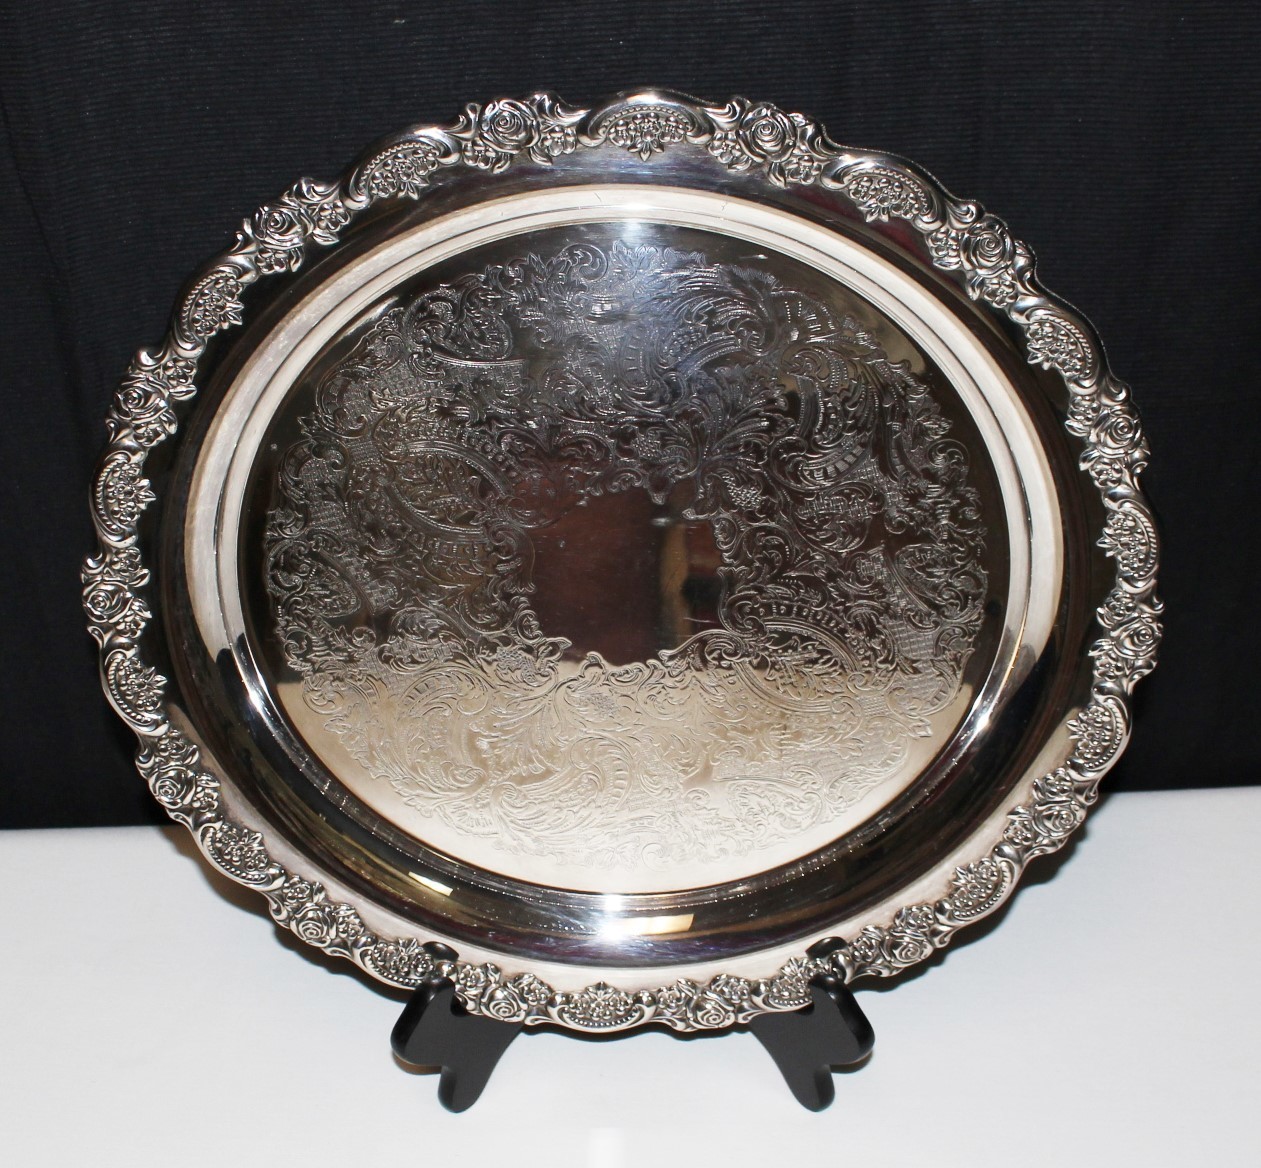 1960's ONEIDA DU Maurier 15” Silver Plate Heavy Scallop Ornate Edge Serving Tray